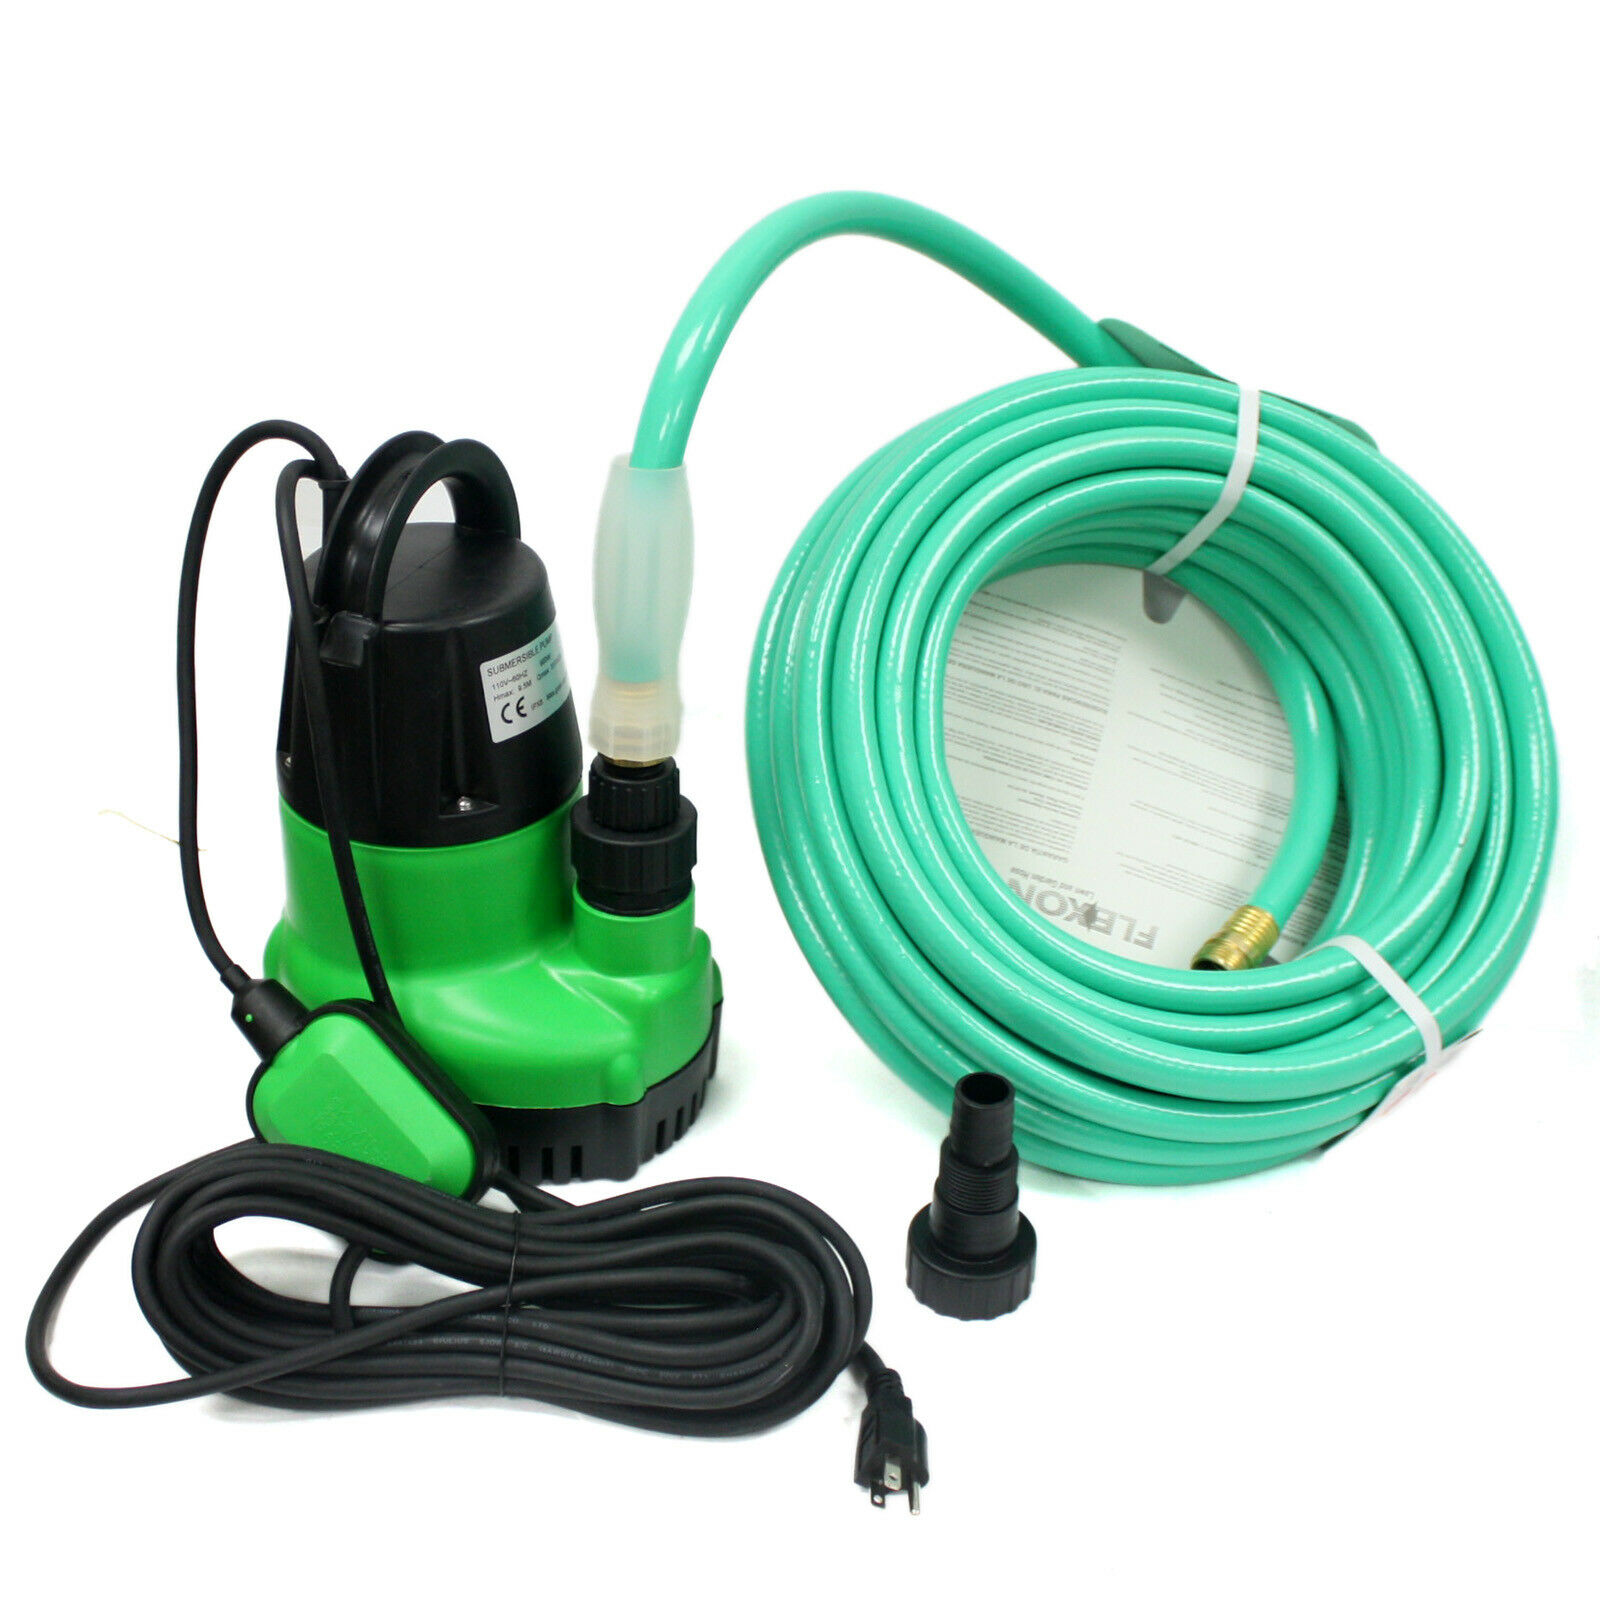 1/4 Portable Submersible Pump Utility Pump Water Pump With Hose High Flow 1500 GPH For Water Removal Household Drainage Sump Pump 3/4inch Garden Hose Adaptor US SHIPPED Green 